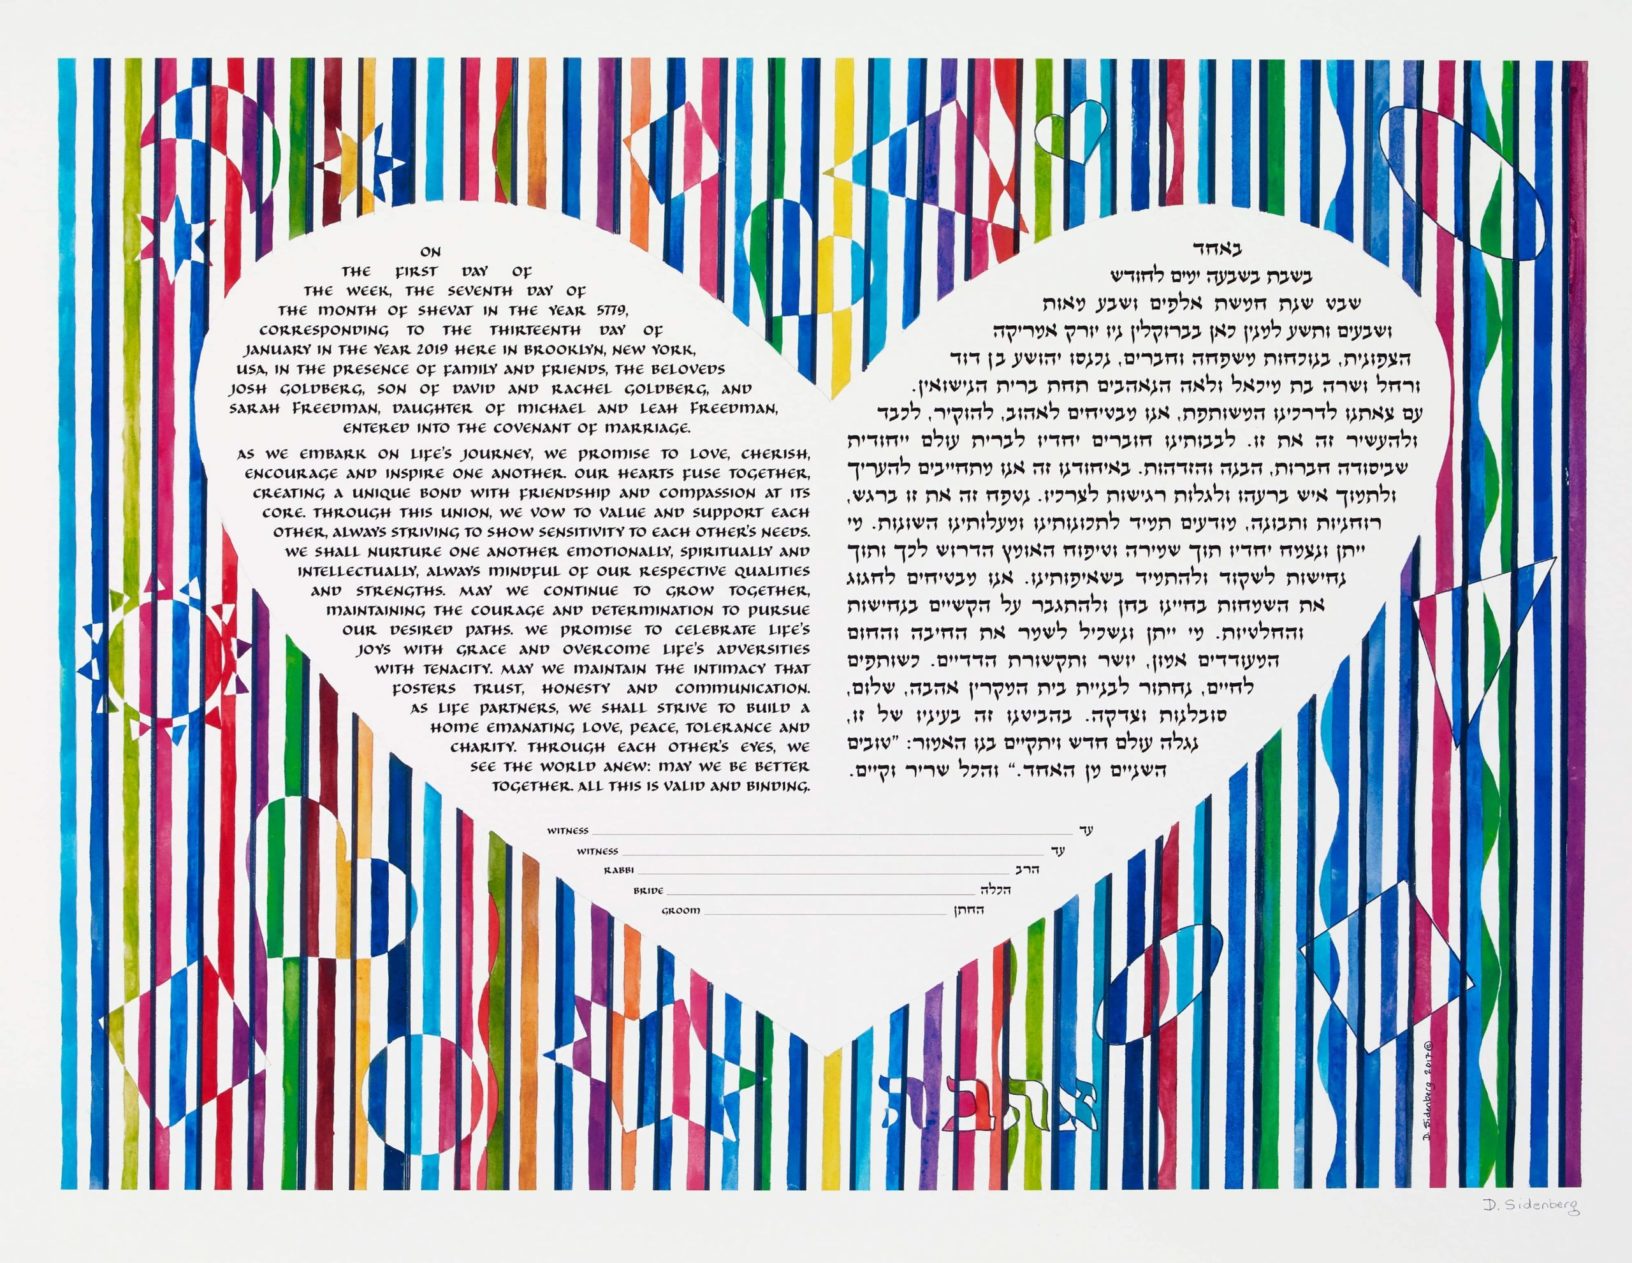 The Heart's Reflections Ketubah Marriage Contracts by Diane Sidenberg